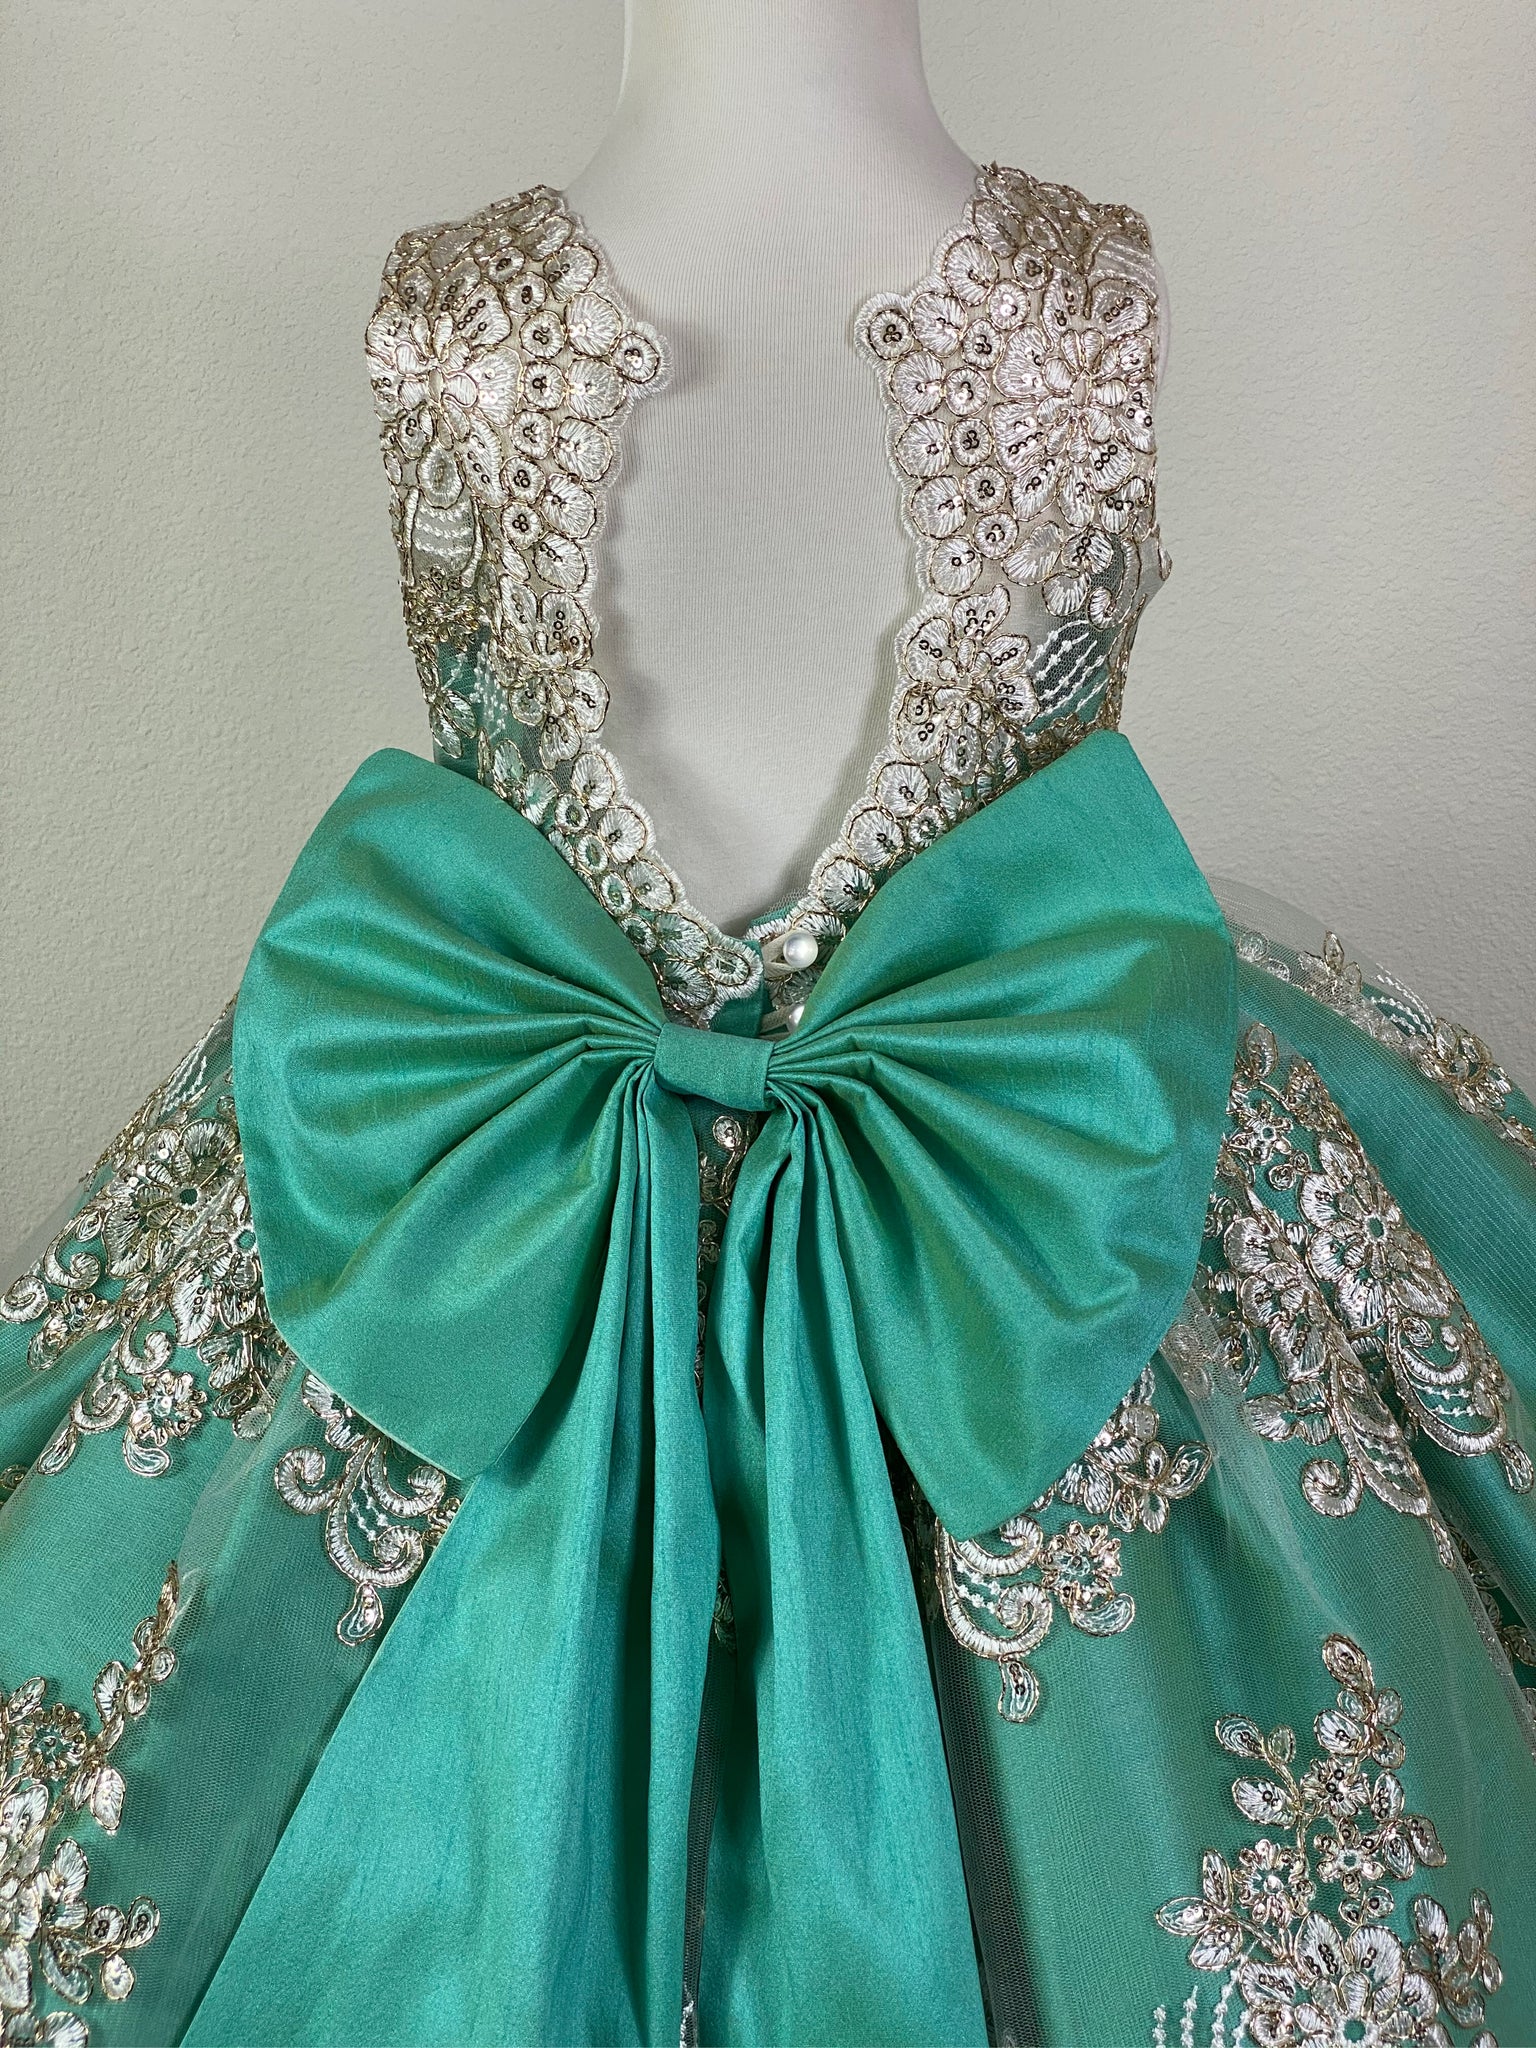 Menta Green, size 4 illusion bodice with embroidered white appliques on tulle Embellished rhinestone band along lower bodice Menta blue satin skirting with embroidered white appliques on tulle overlay Open back with button closure Large menta blue satin bow Dress pictured with a petticoat Petticoat not included  Choose from a tulle, cloth, or wire for best look